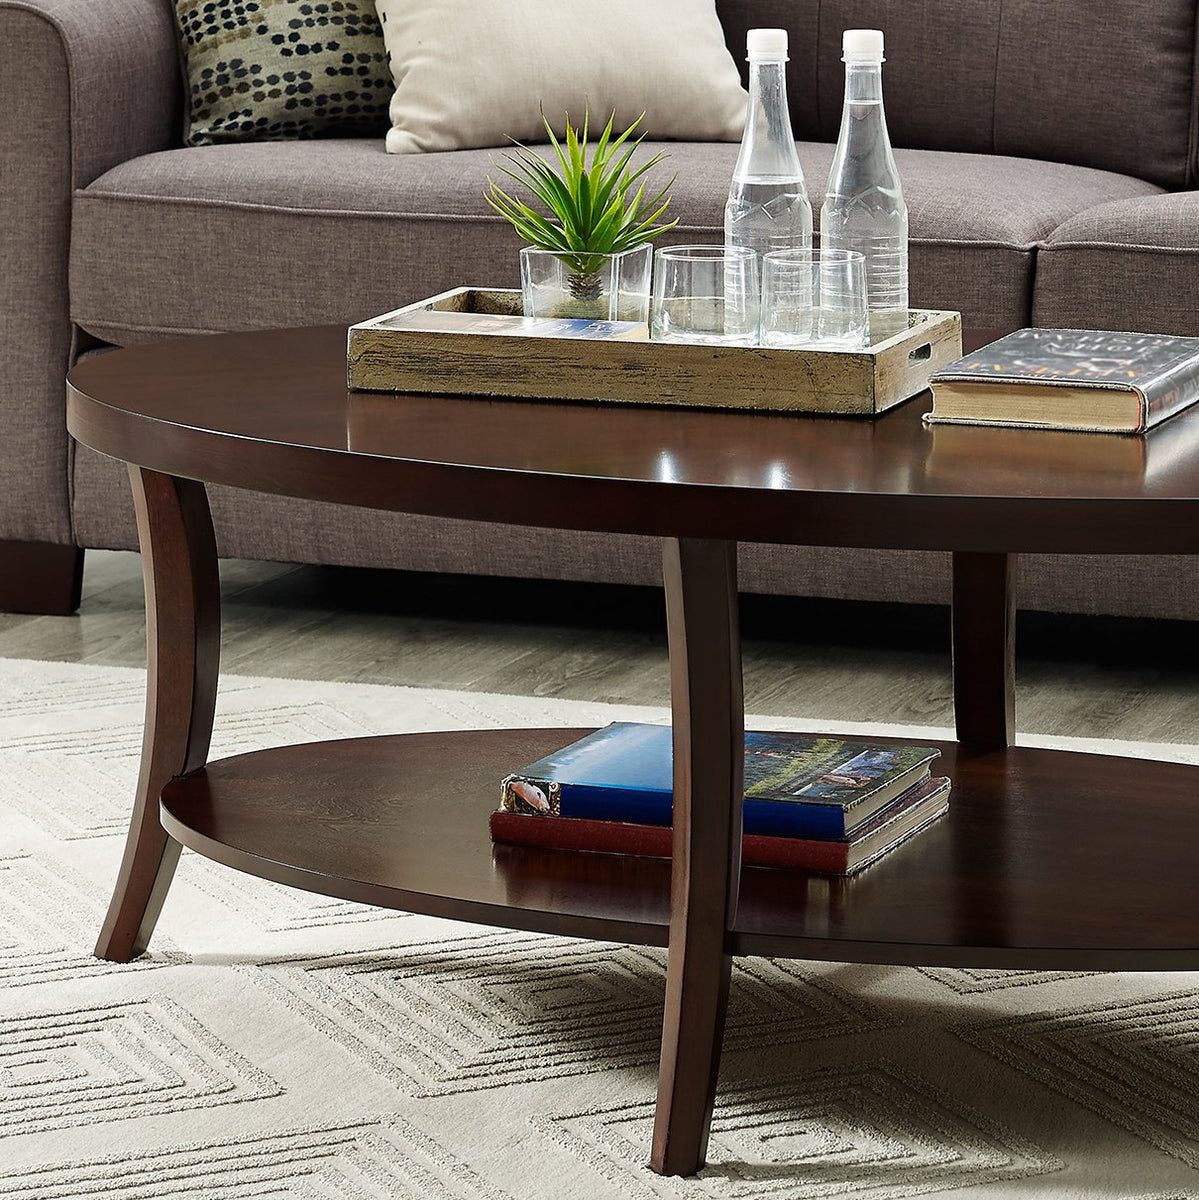 Perth Espresso Oval Coffee Table With Shelf – Roundhill Furniture Inside Espresso Wood Finish Coffee Tables (View 15 of 21)